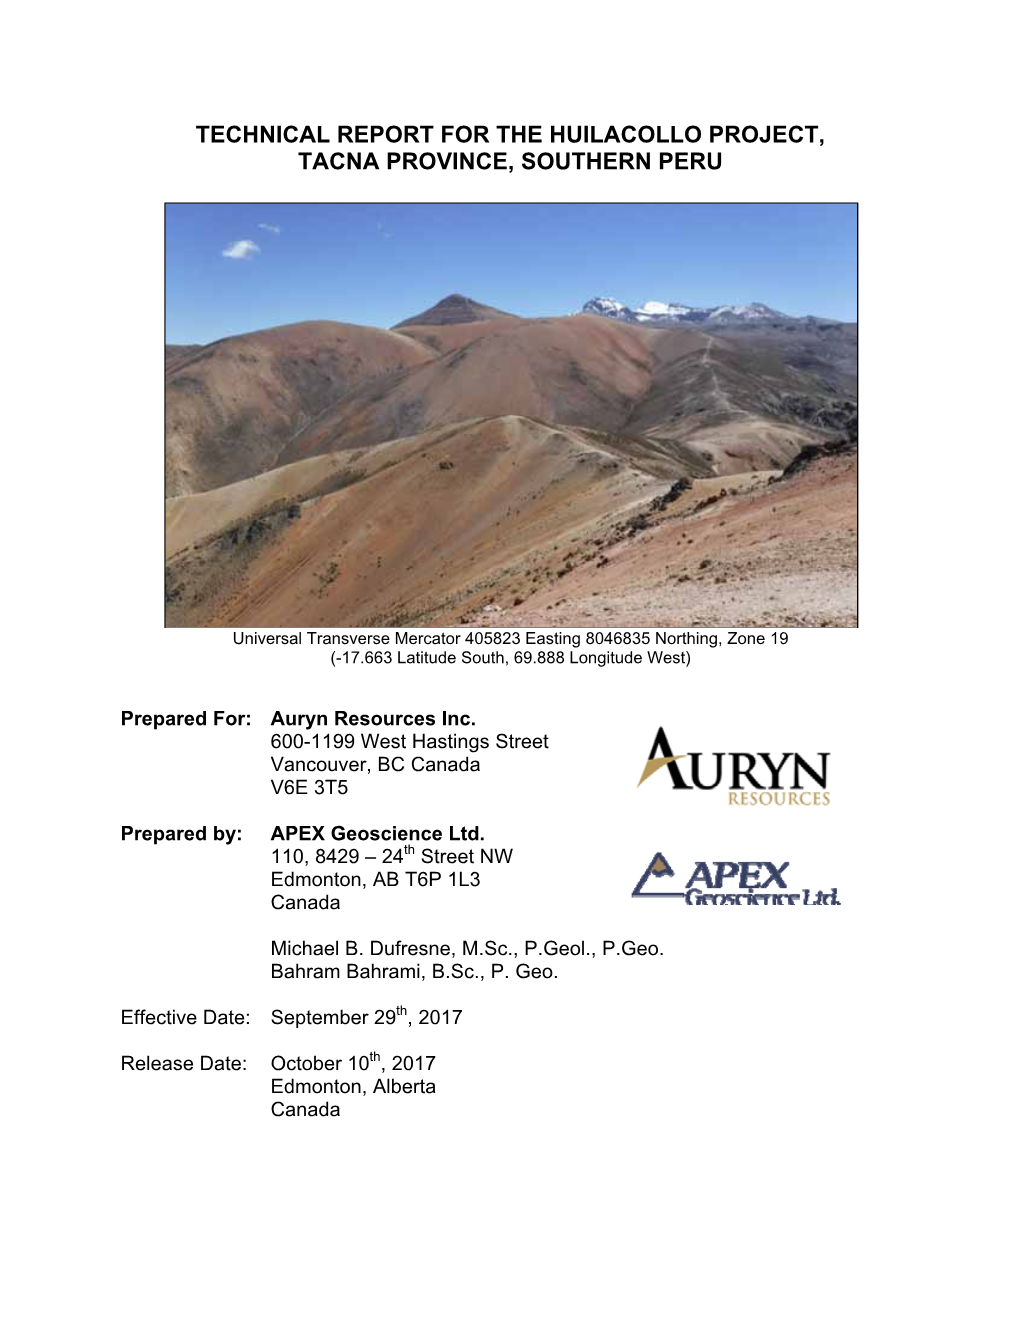 Technical Report for the Huilacollo Project, Tacna Province, Southern Peru